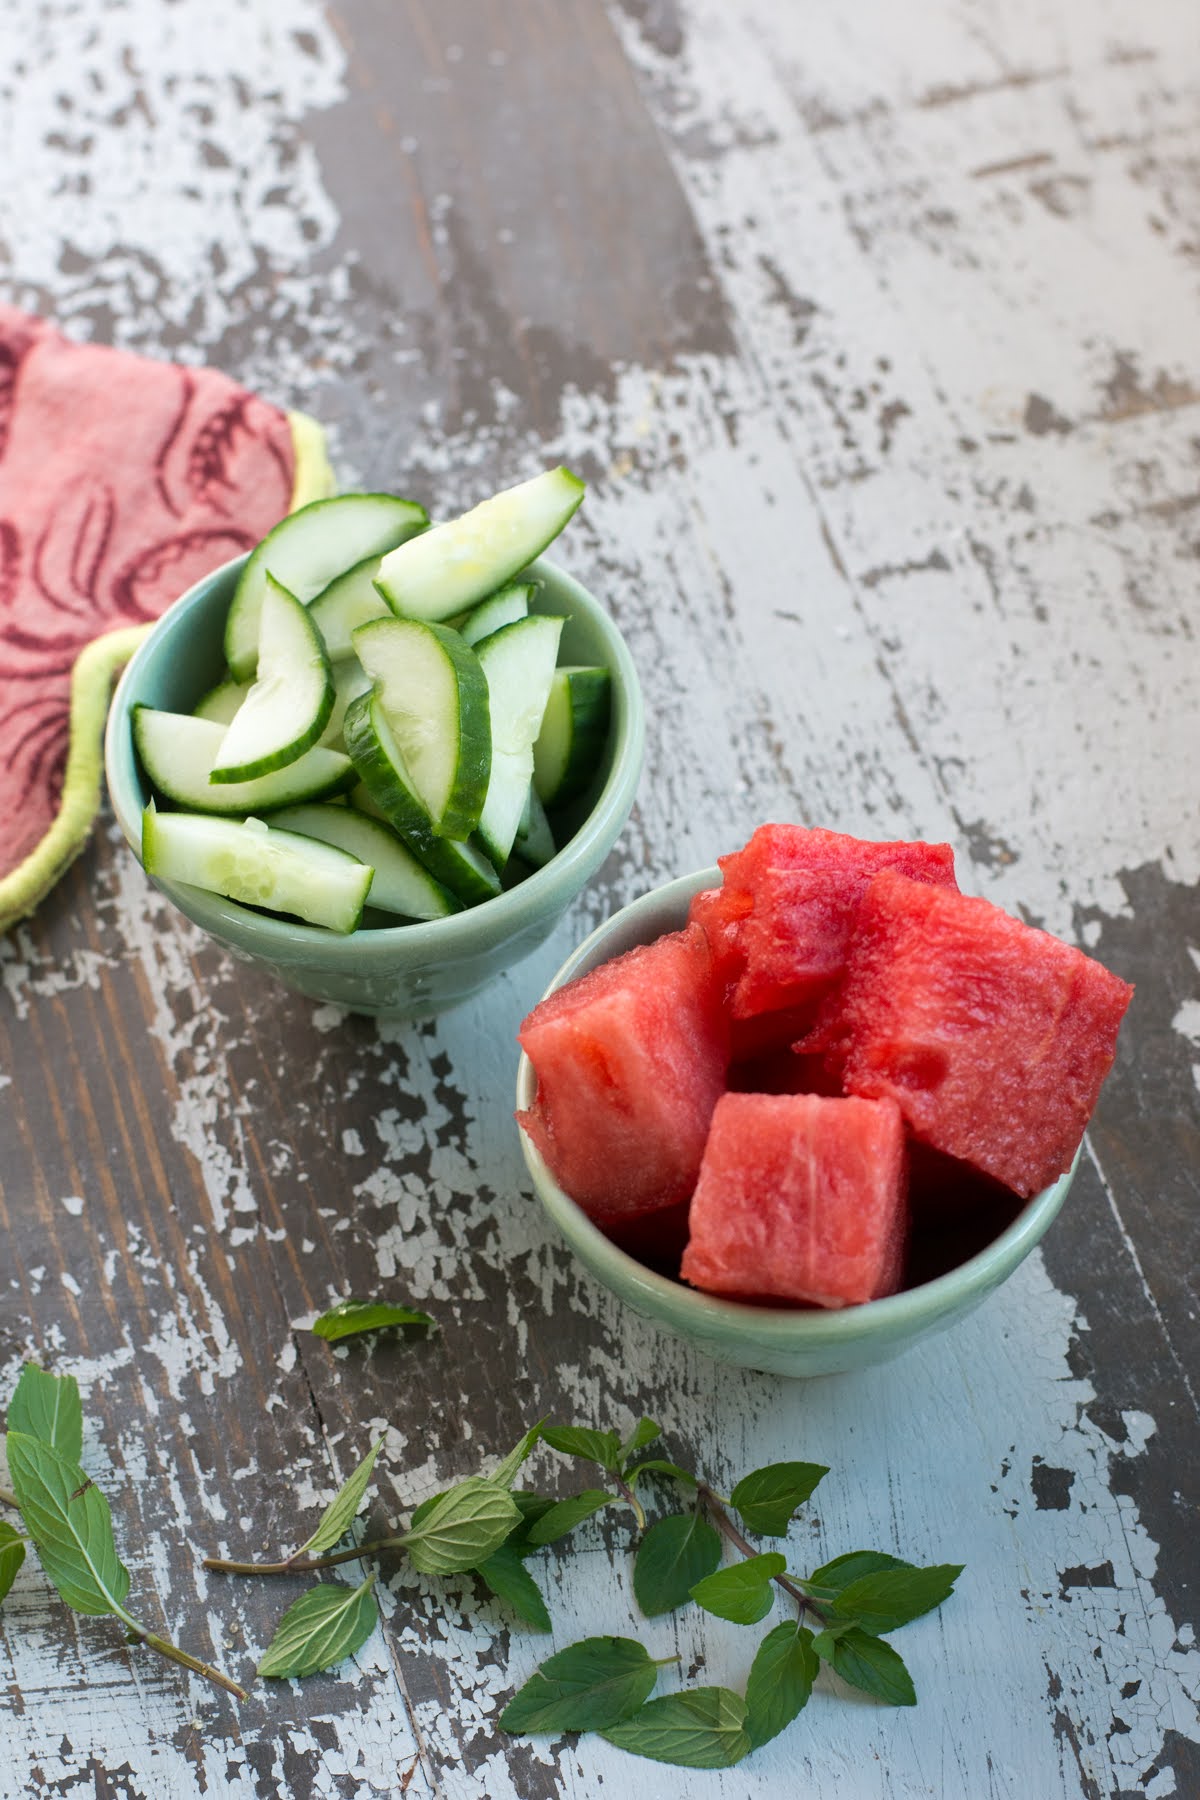 Small bowls of watermelon and cucumber